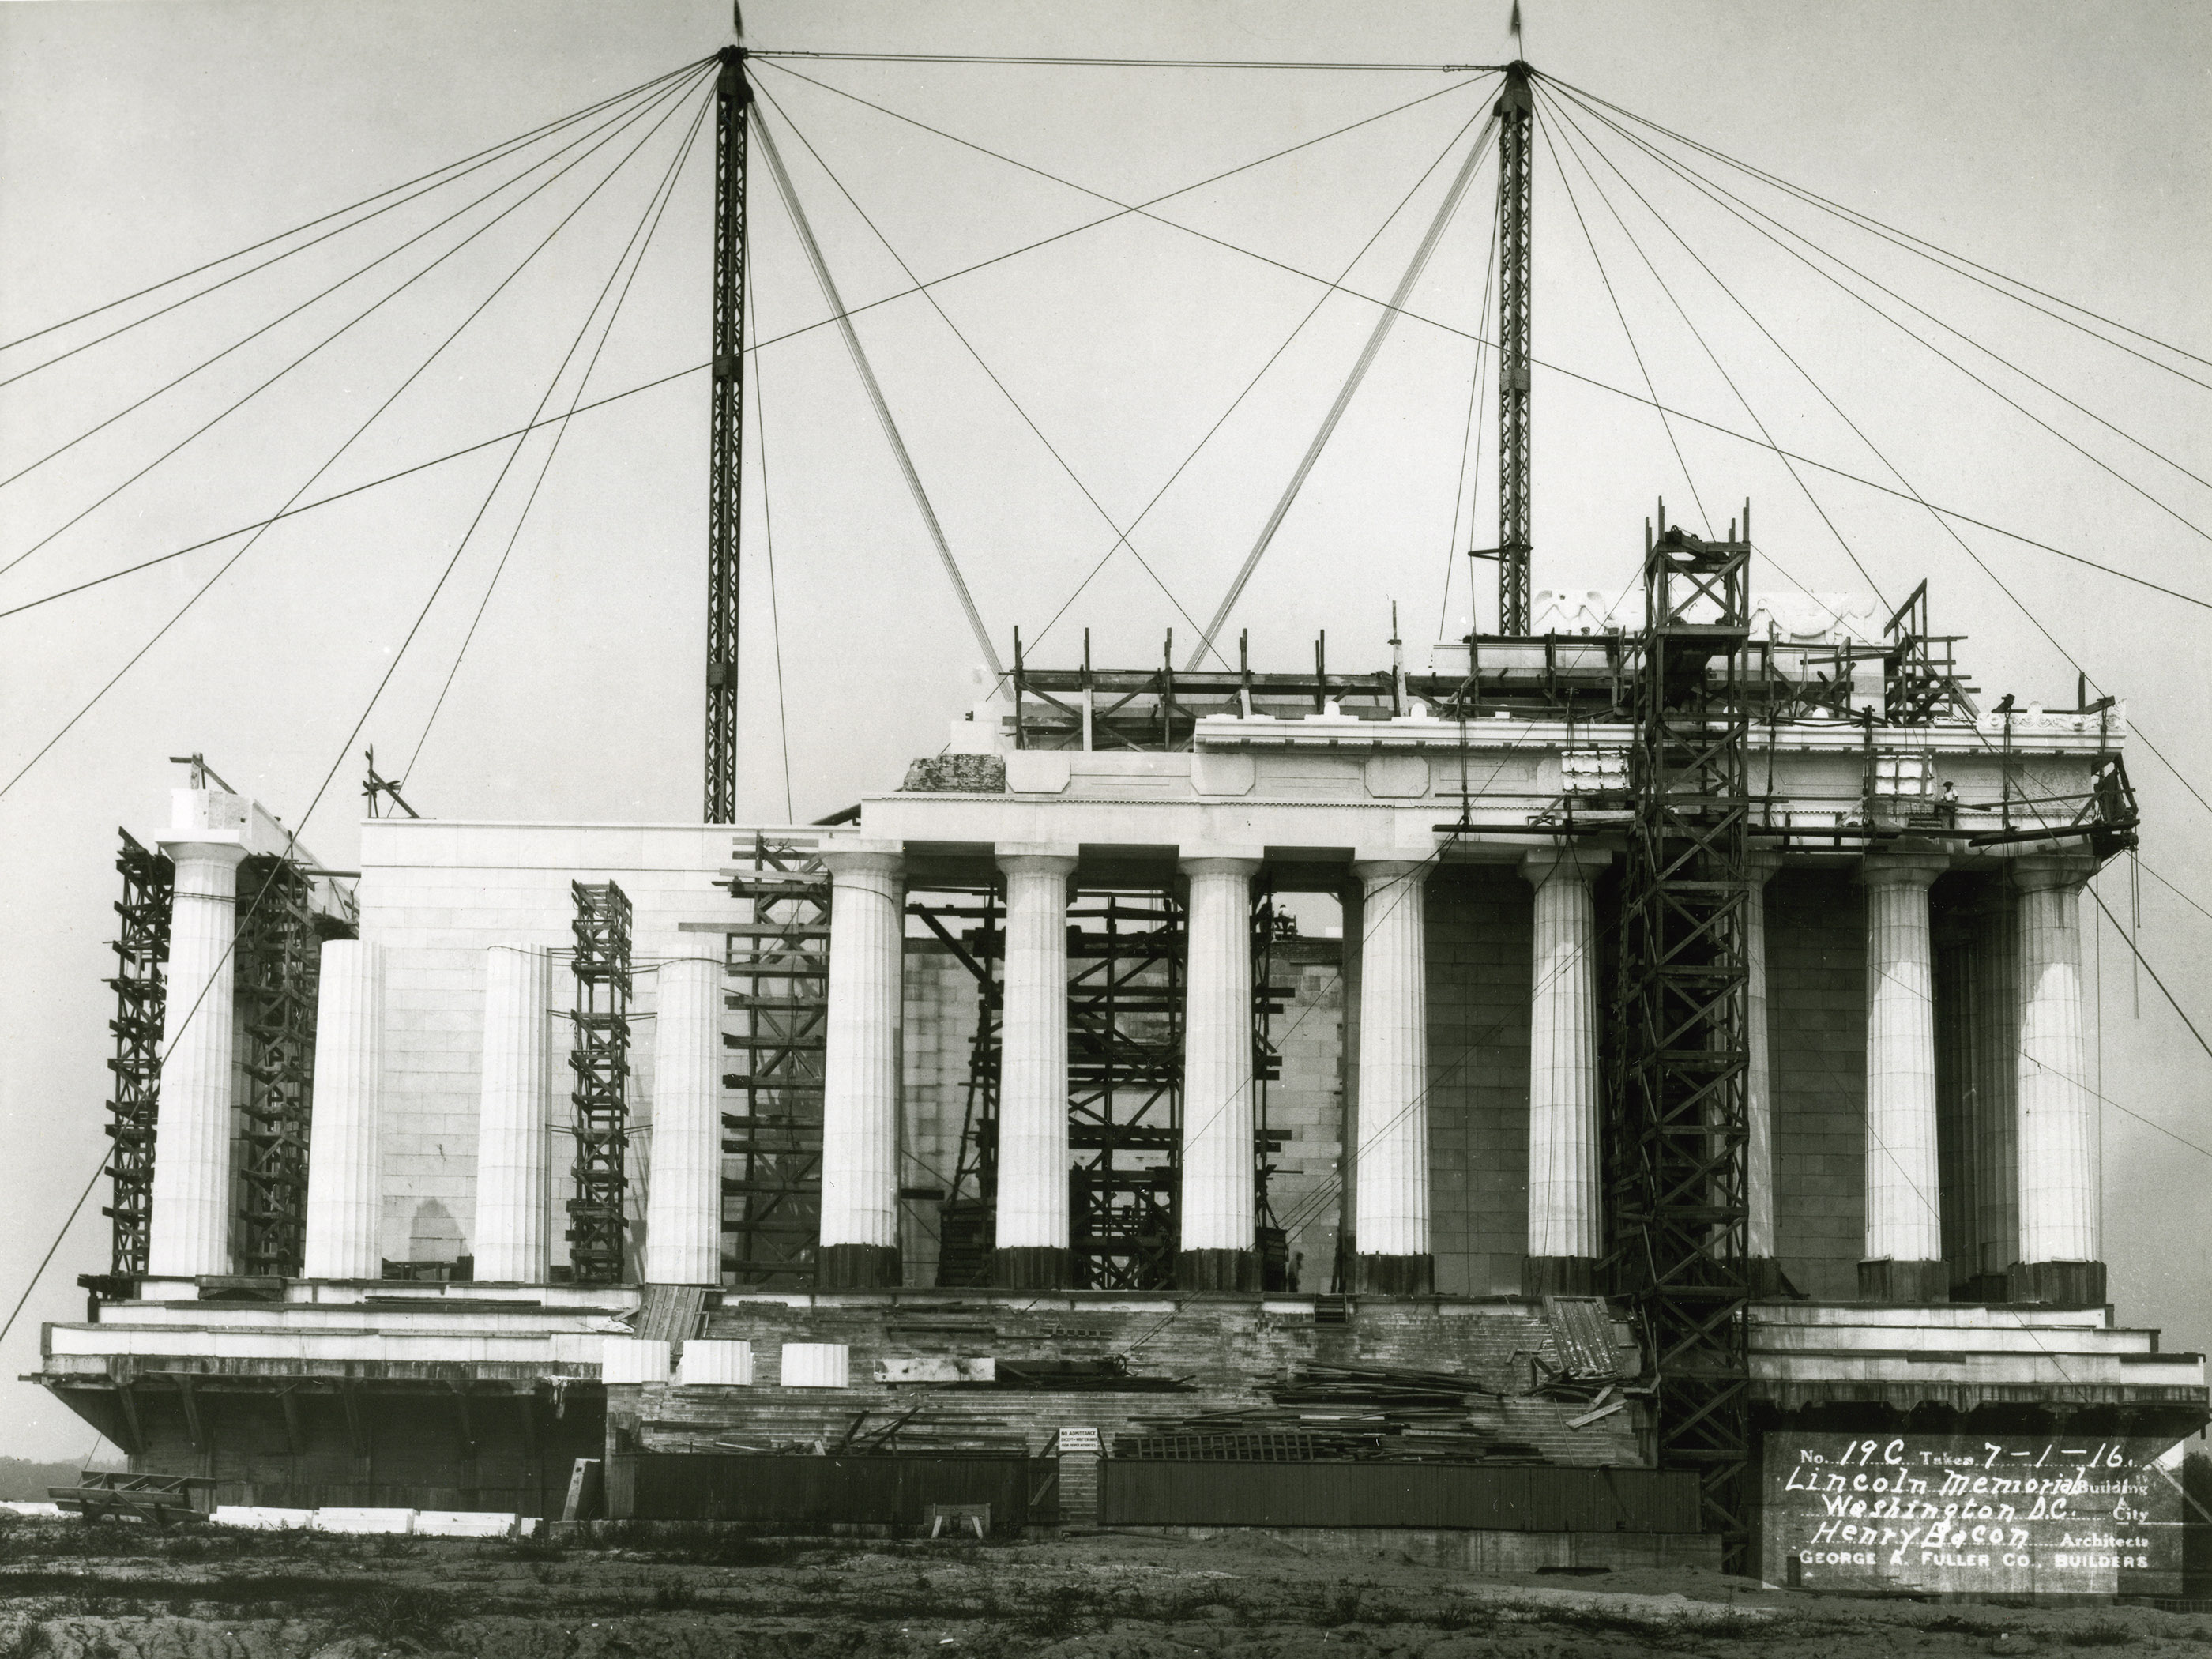 Lincoln Memorial building nearly complete, part of roof still missing